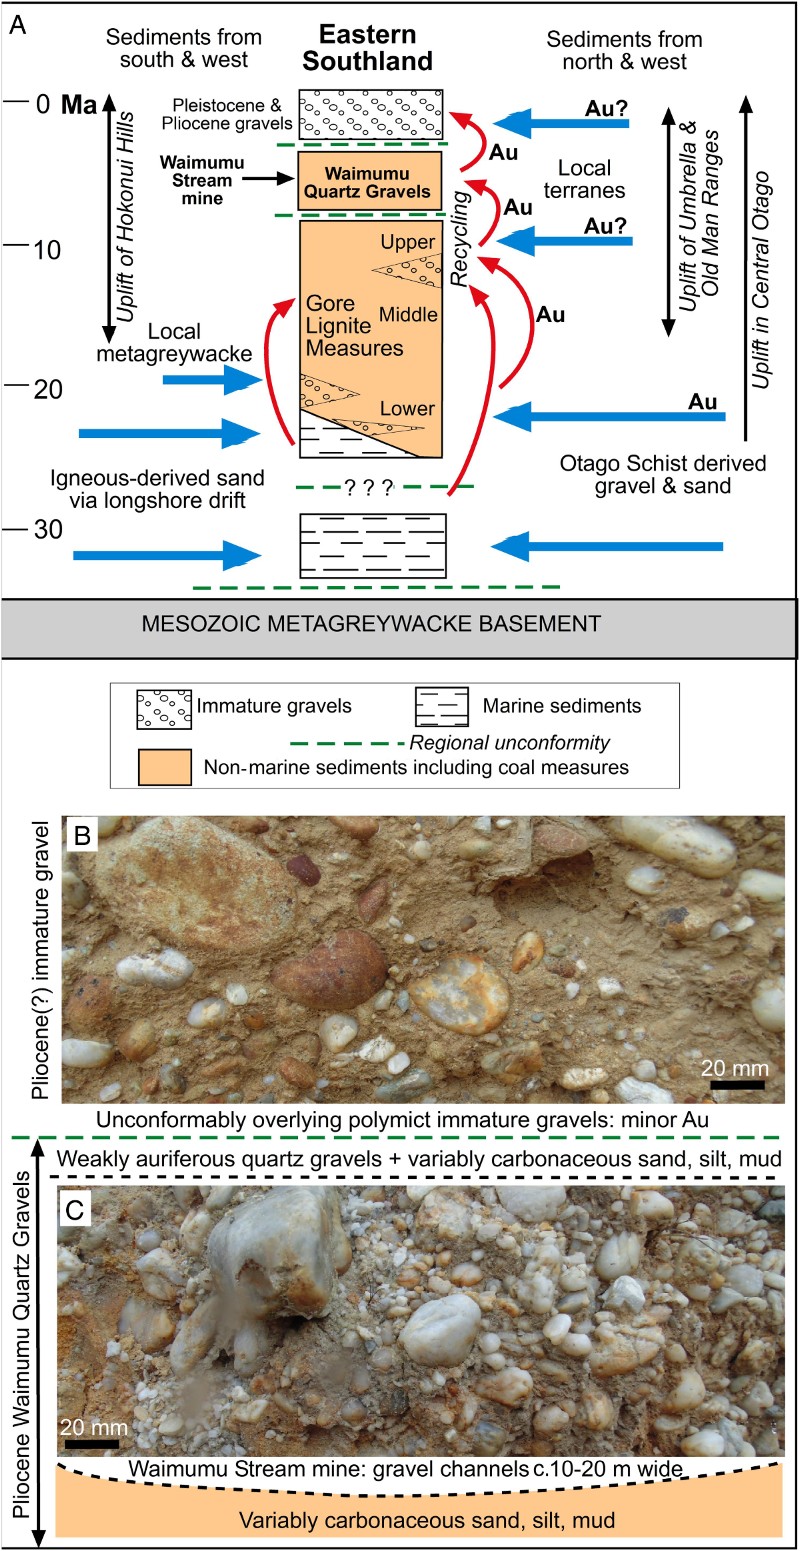 Figure 3 Stratigraphic and sedimentological setting for the Waimumu Stream mine in the Waimumu Quartz Gravels. A, Summary stratigraphic column, with indications of sediment transport directions (partly after Isaac & Lindqvist Citation1990; Stein et al. Citation2011). B, Photograph of polymict gravels that overlie the mine gravels. C, Gold-bearing Waimumu Quartz Gravels in a channel at the mine.